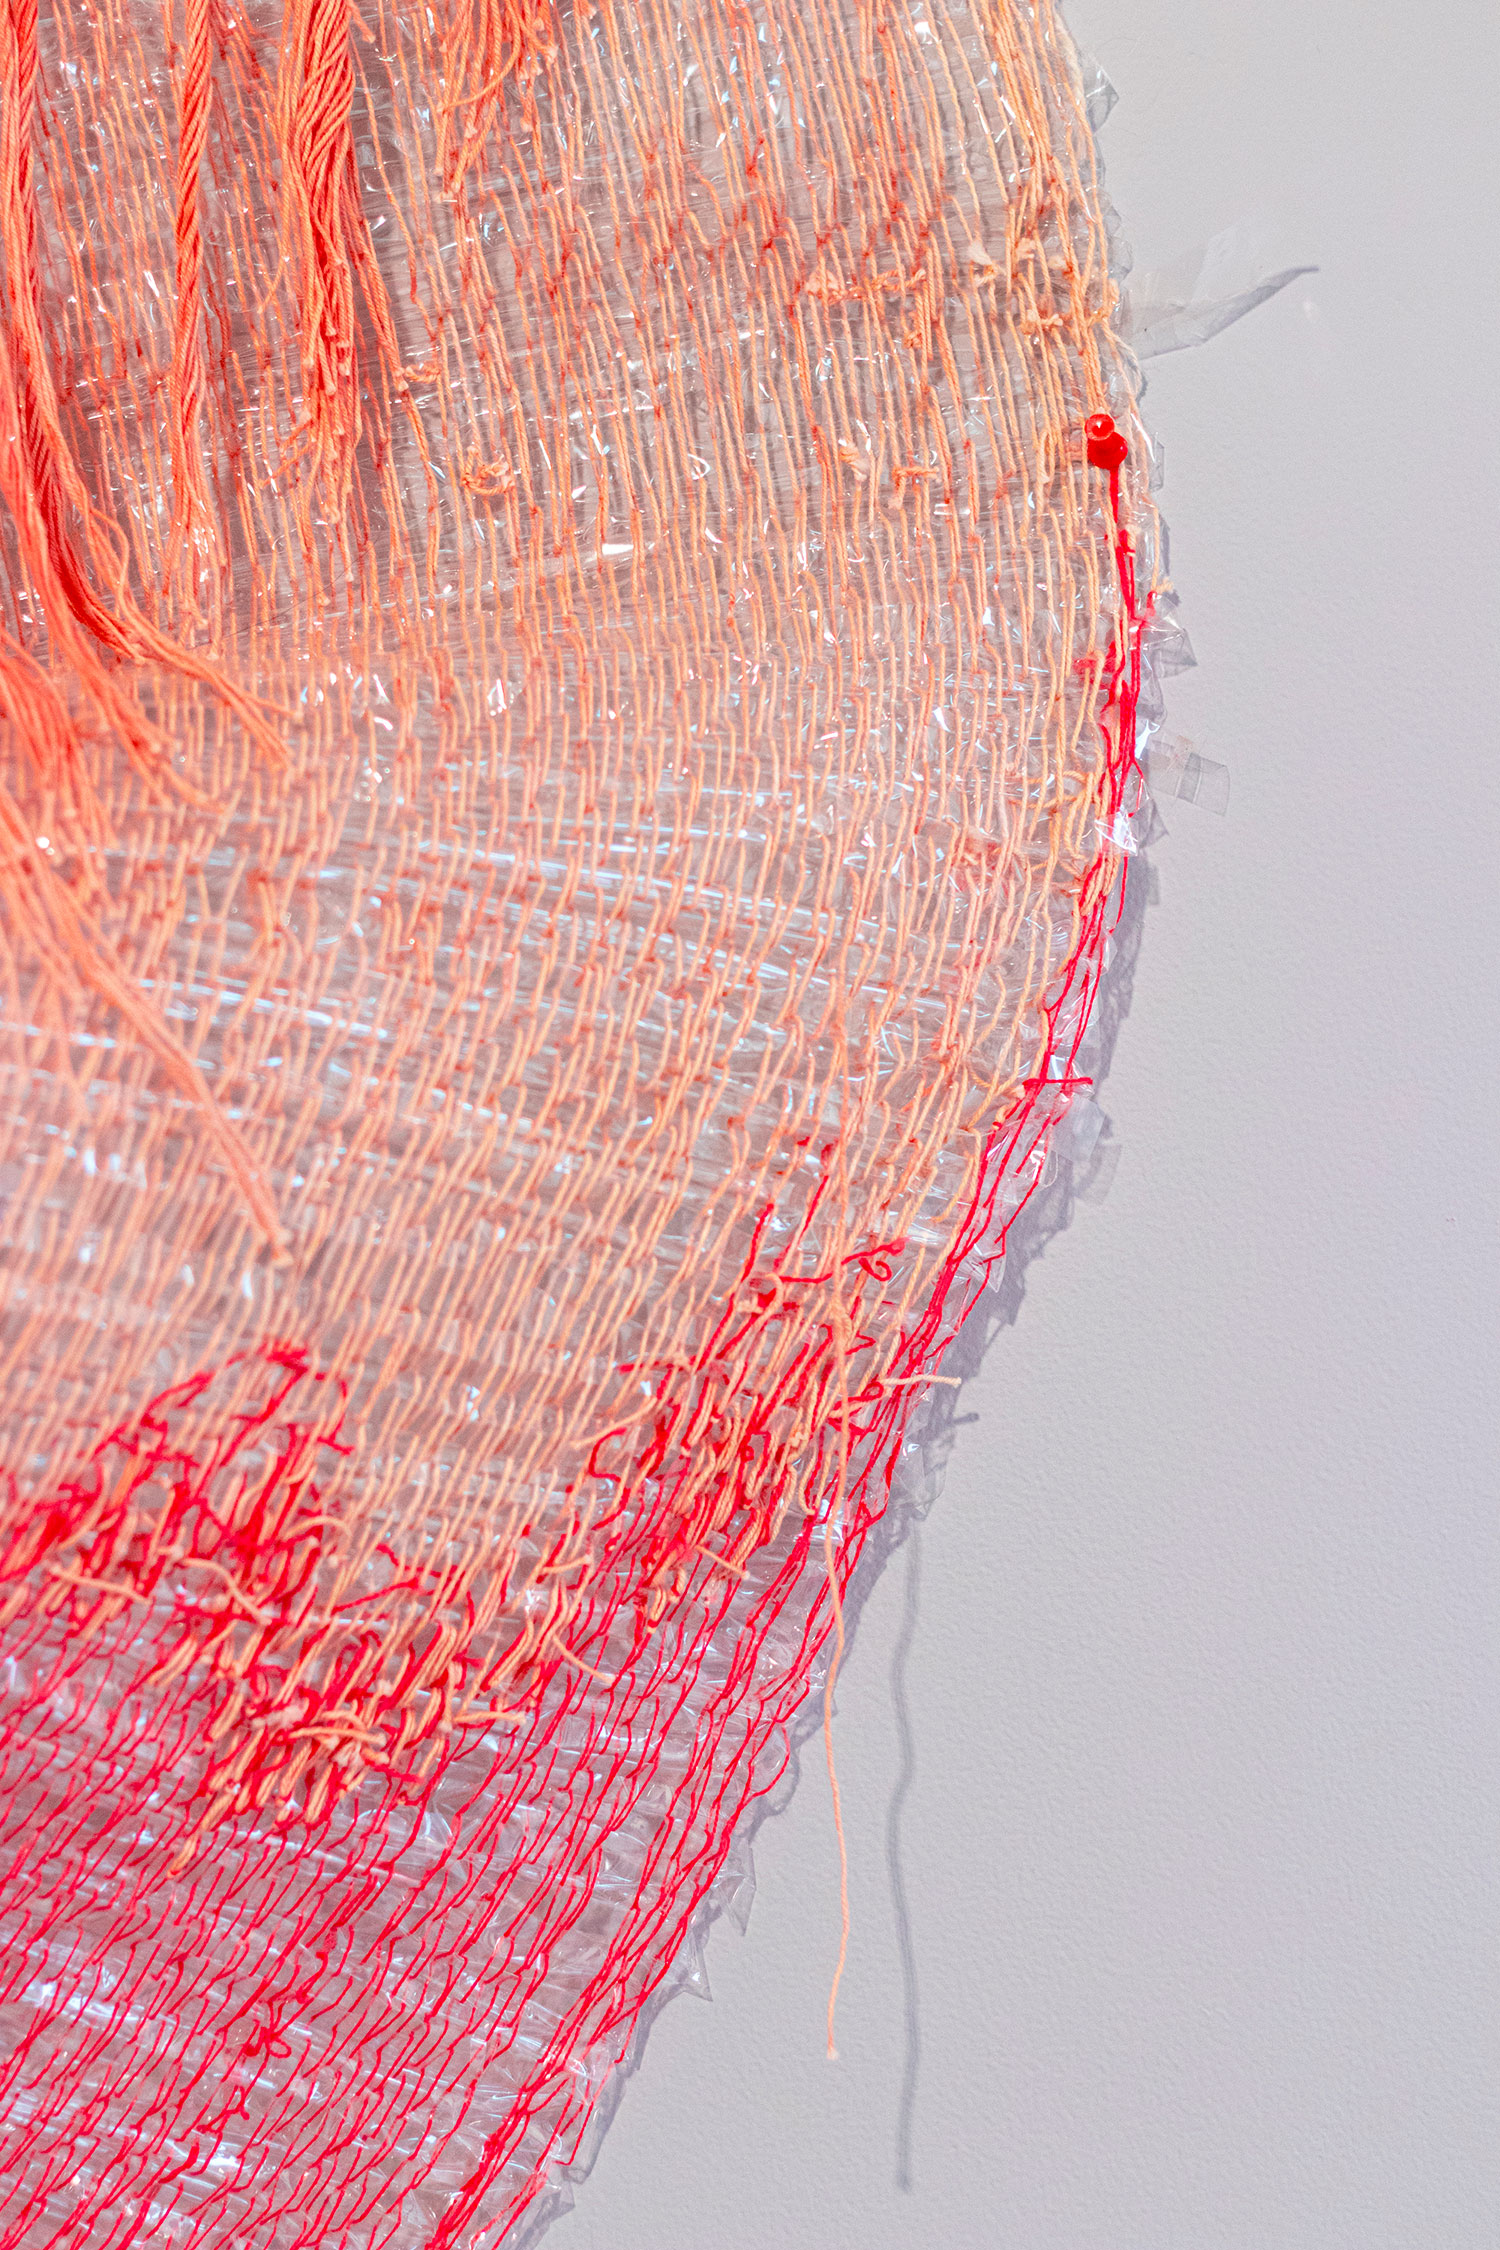 Detail of the fibre work and knotting in Red Tide